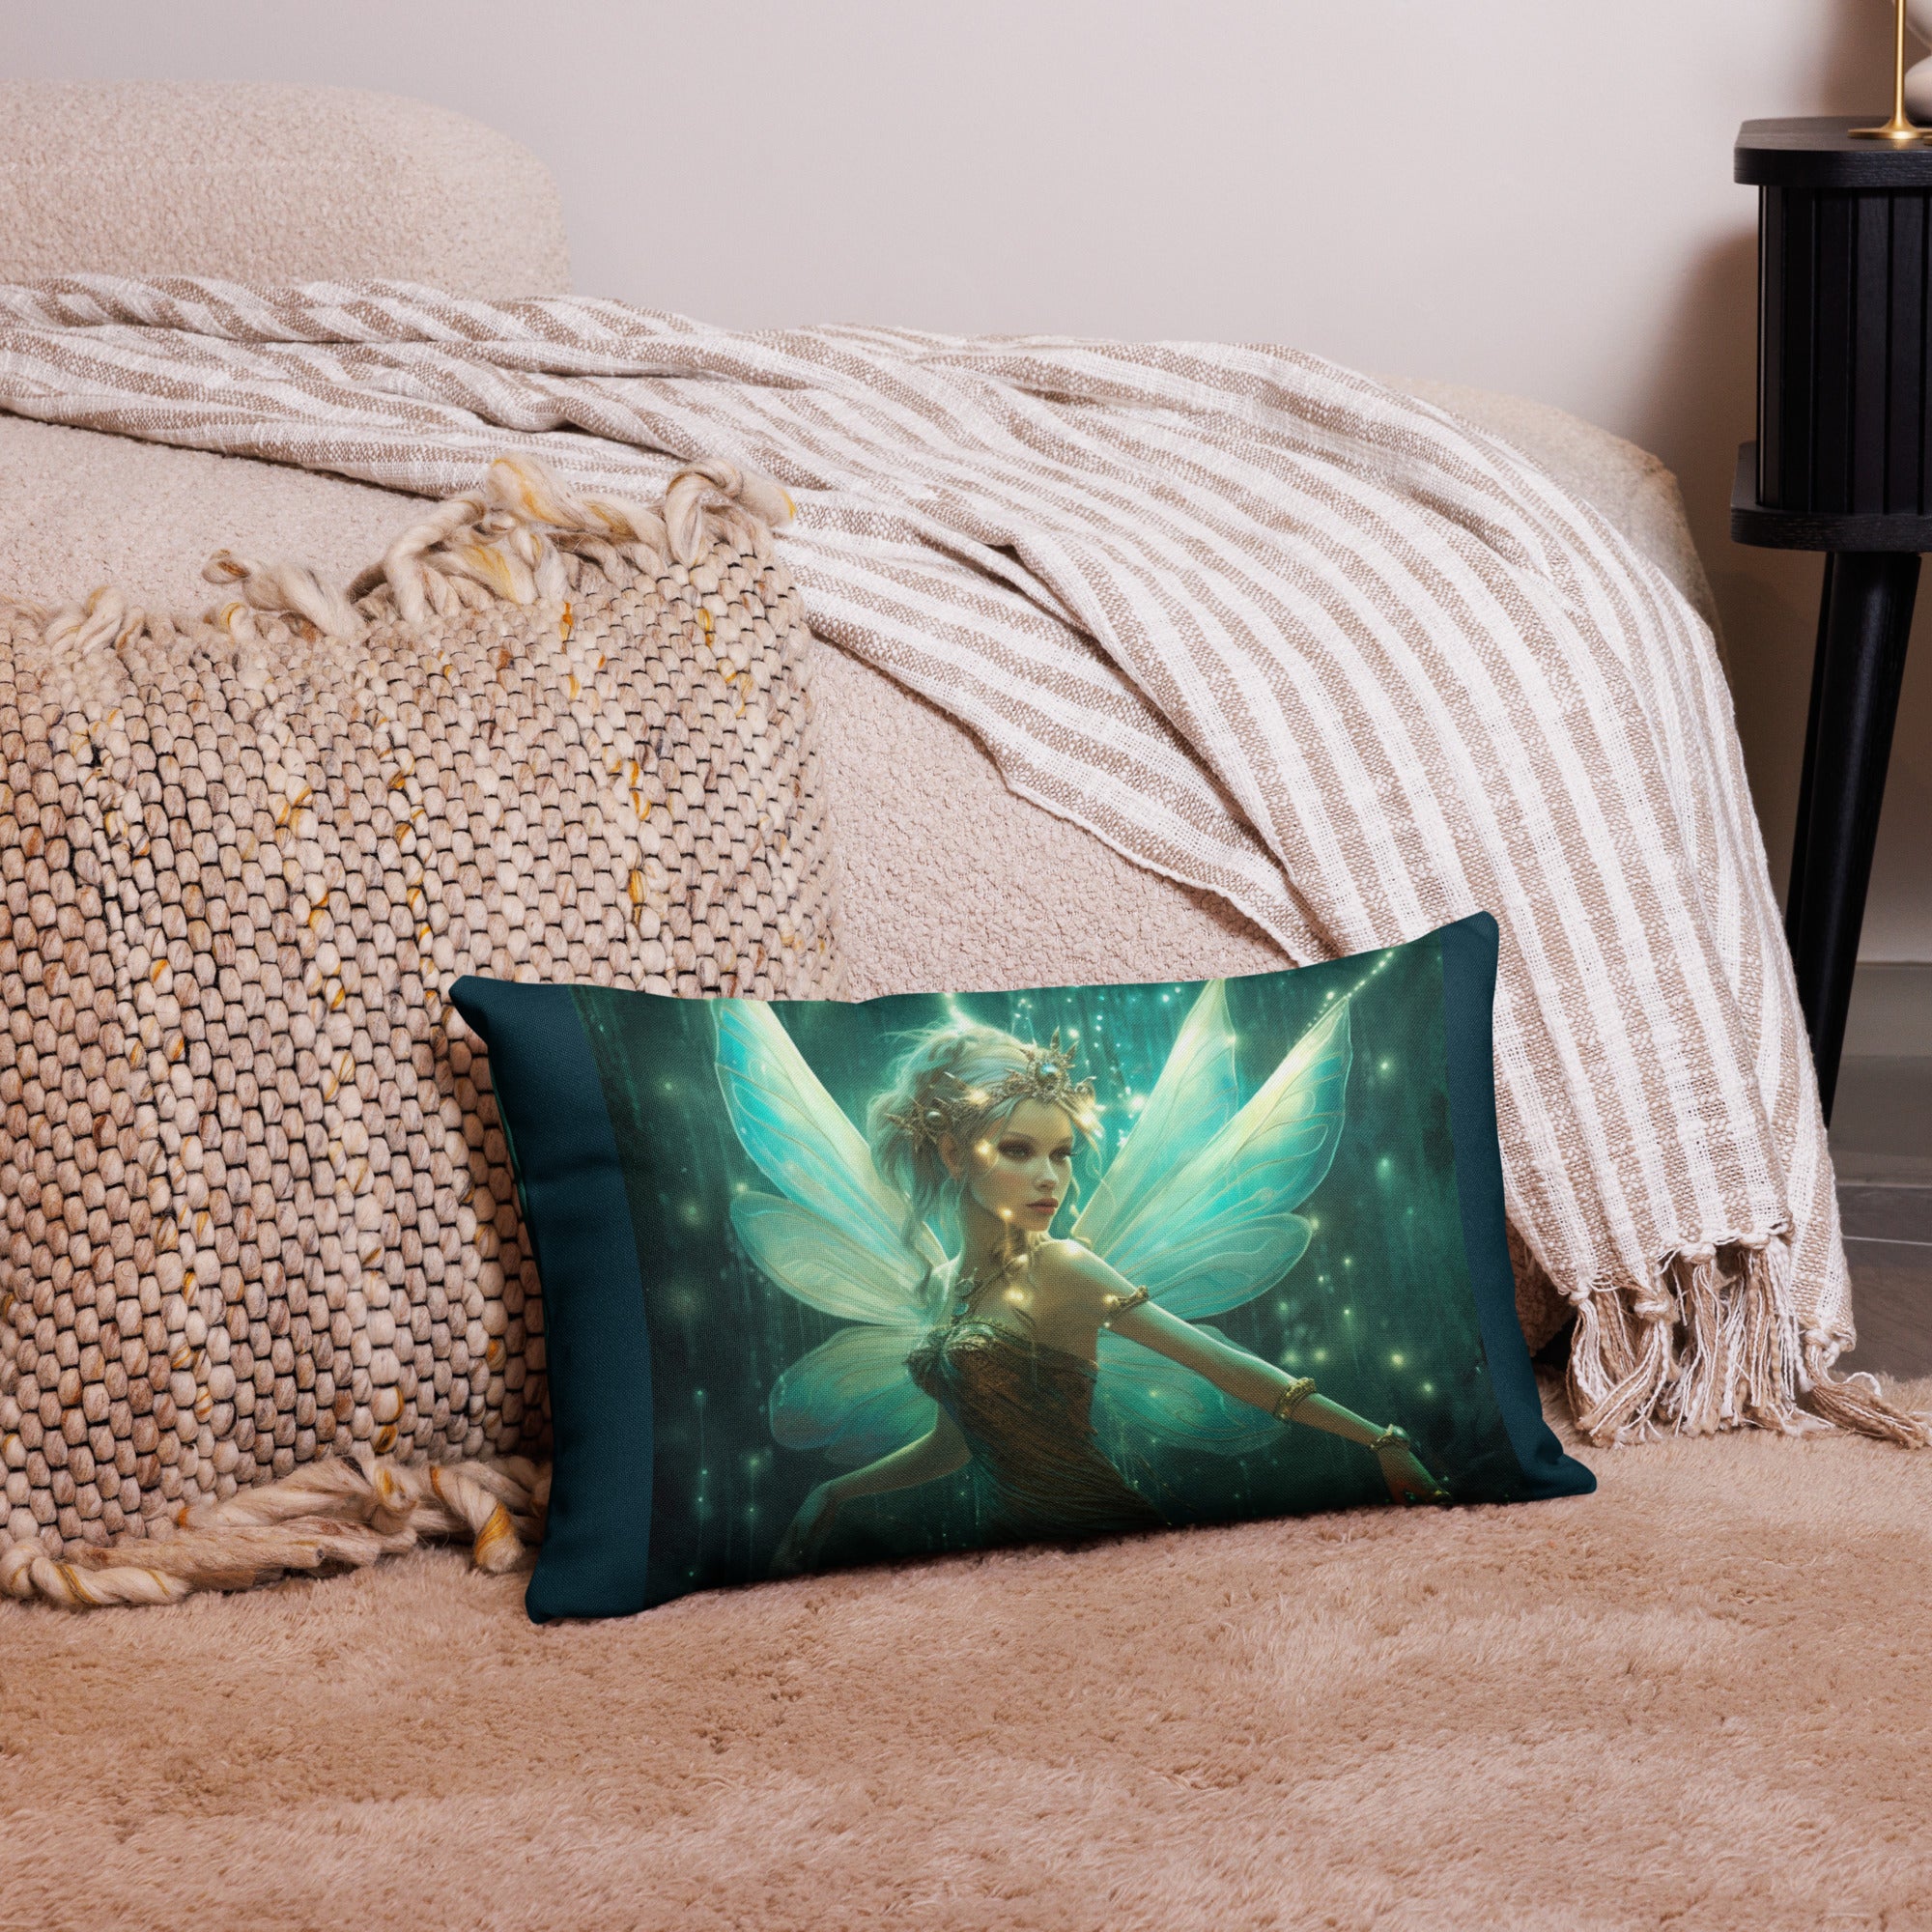 Fairy Pillow Case Set | Triad of Enchantment: Ultimate Fairy Pillow Case Set – Drift into Dreams with 3 Magical Designs